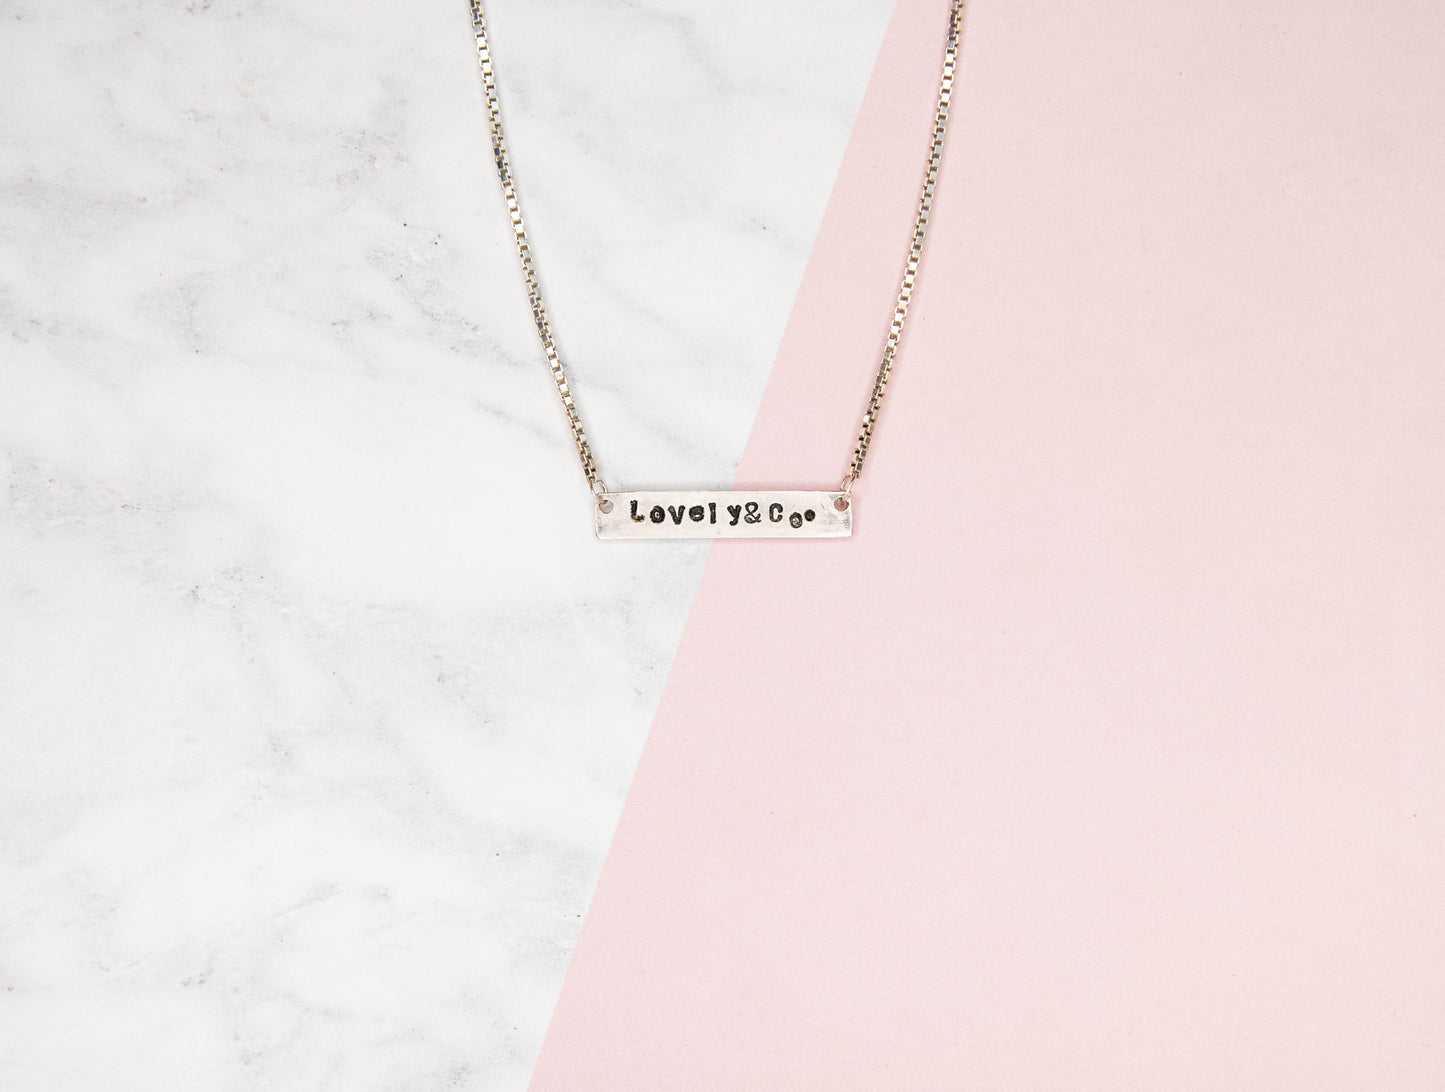 Personalized Name Plate Necklace